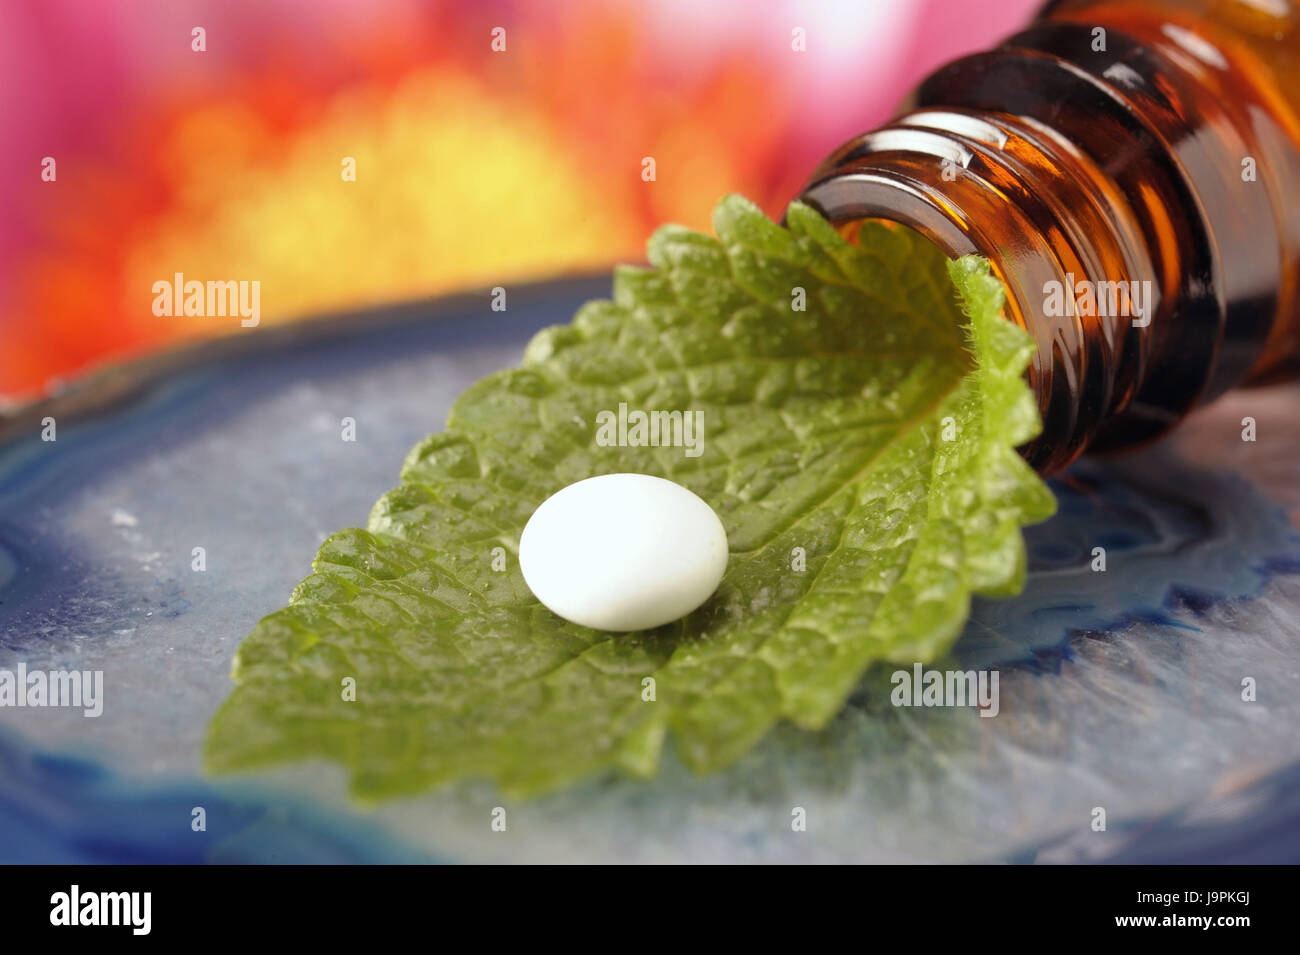 Nature medicine,homoeopathy,tablets,vegetable active ingredients, Stock Photo